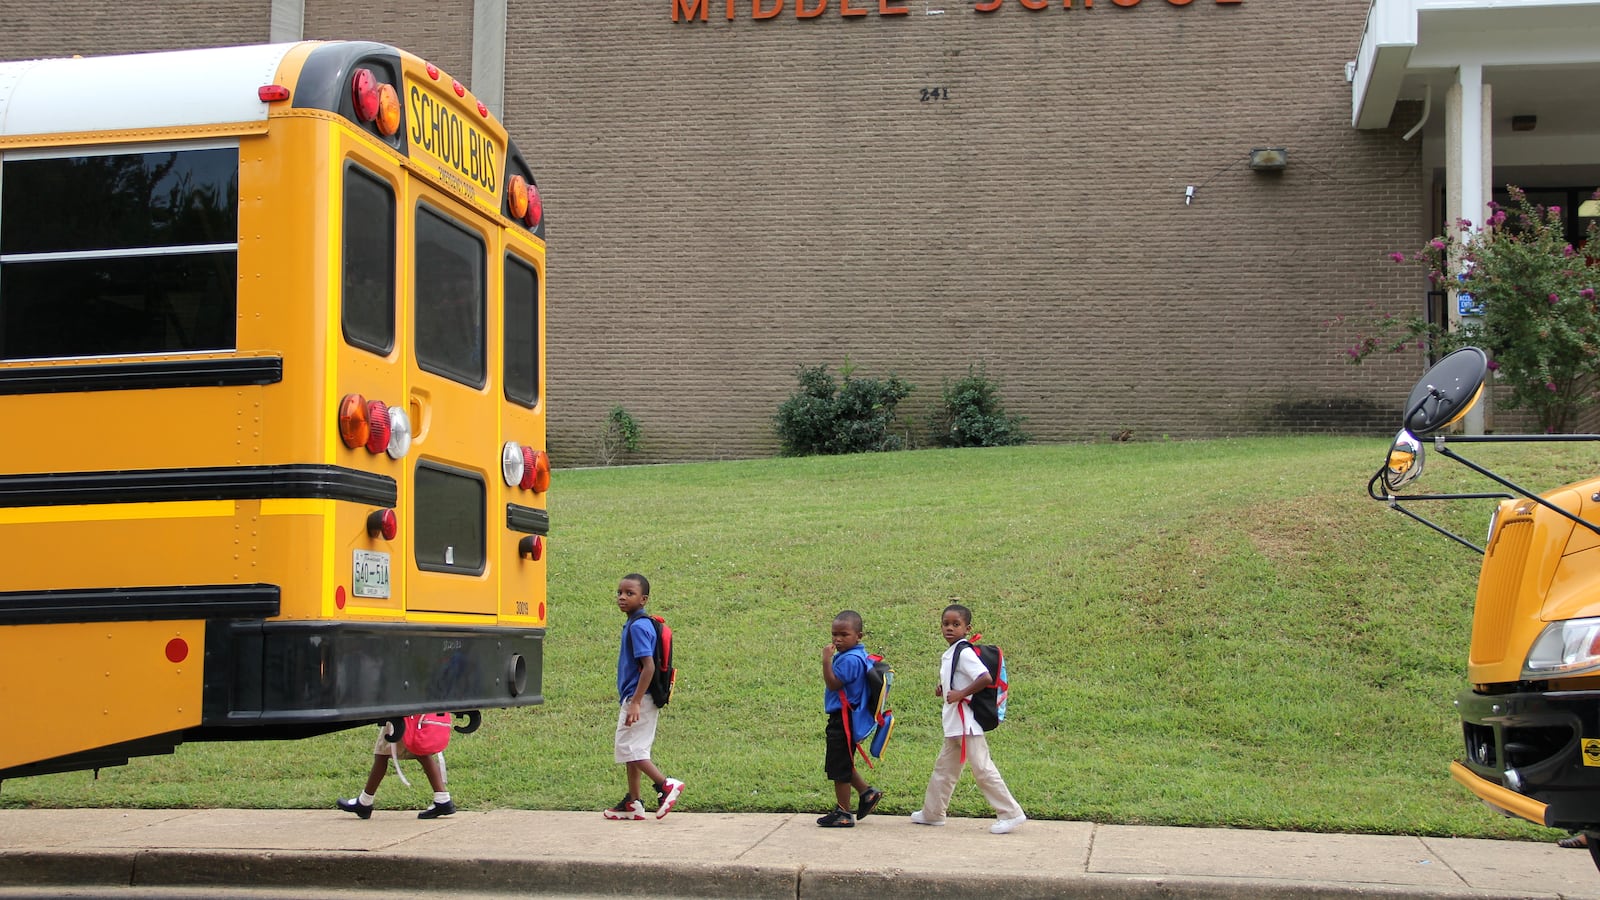 Riverview School, near downtown Memphis, includes elementary-age children, as well as middle school students who live in a mostly low-income community. Shelby County leaders chose Riverview as the site to announce the district's funding lawsuit against the state.